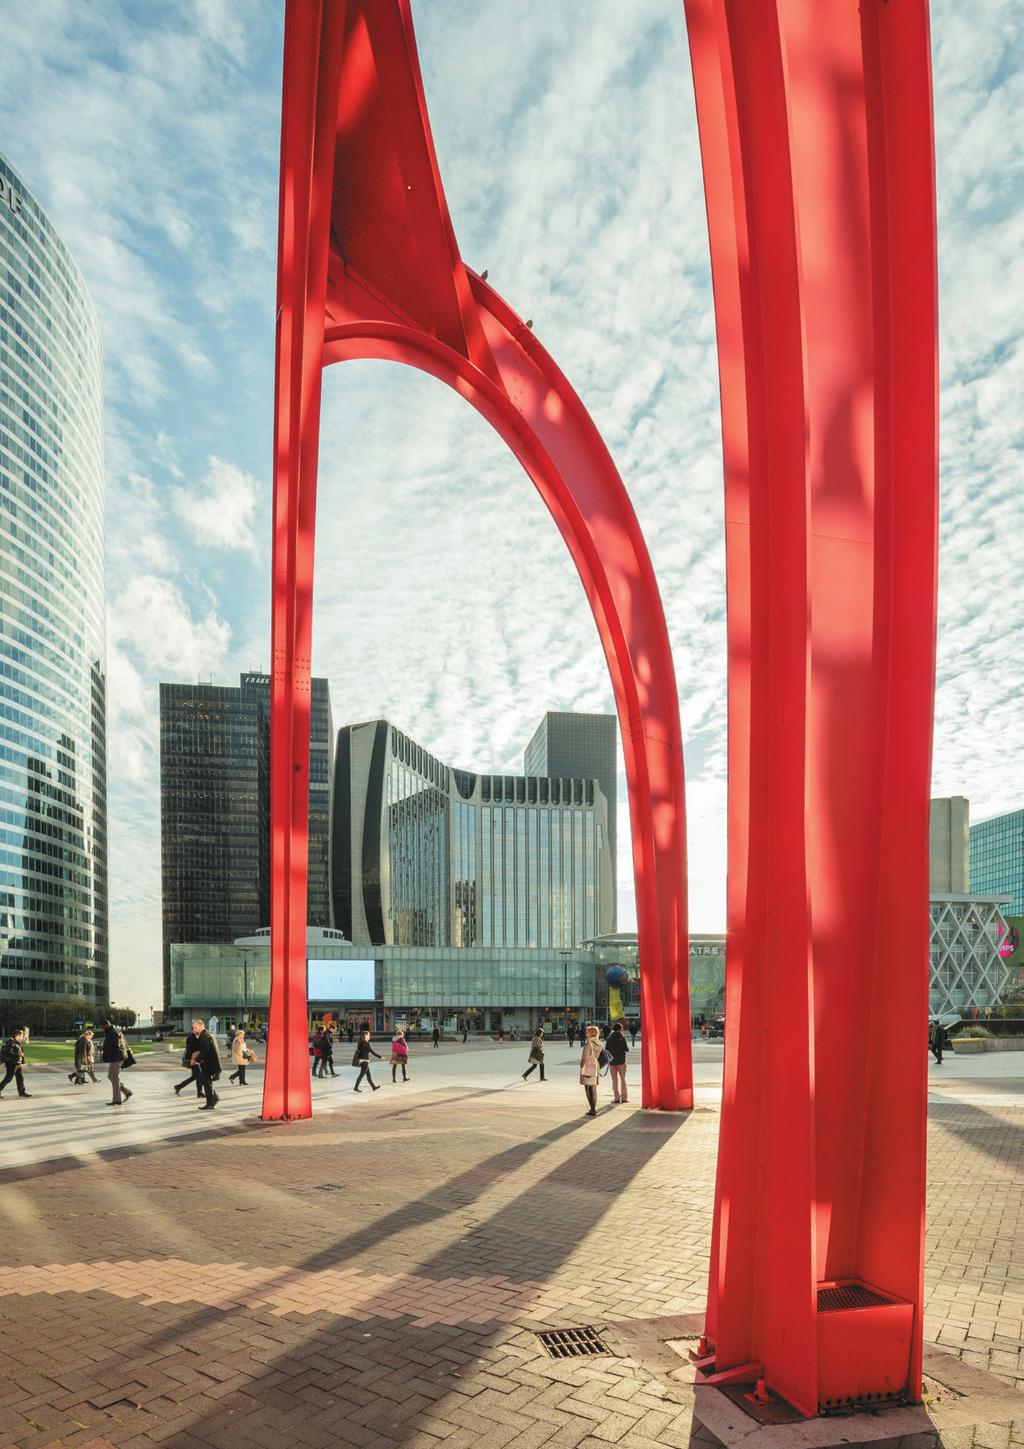 Property supply A FLEXIBLE, RENOVATED AND SUSTAINABLE PROPERTY PORTFOLIO Far from the first generation buildings, La Défense s property portfolio has new towers that meet international norms and